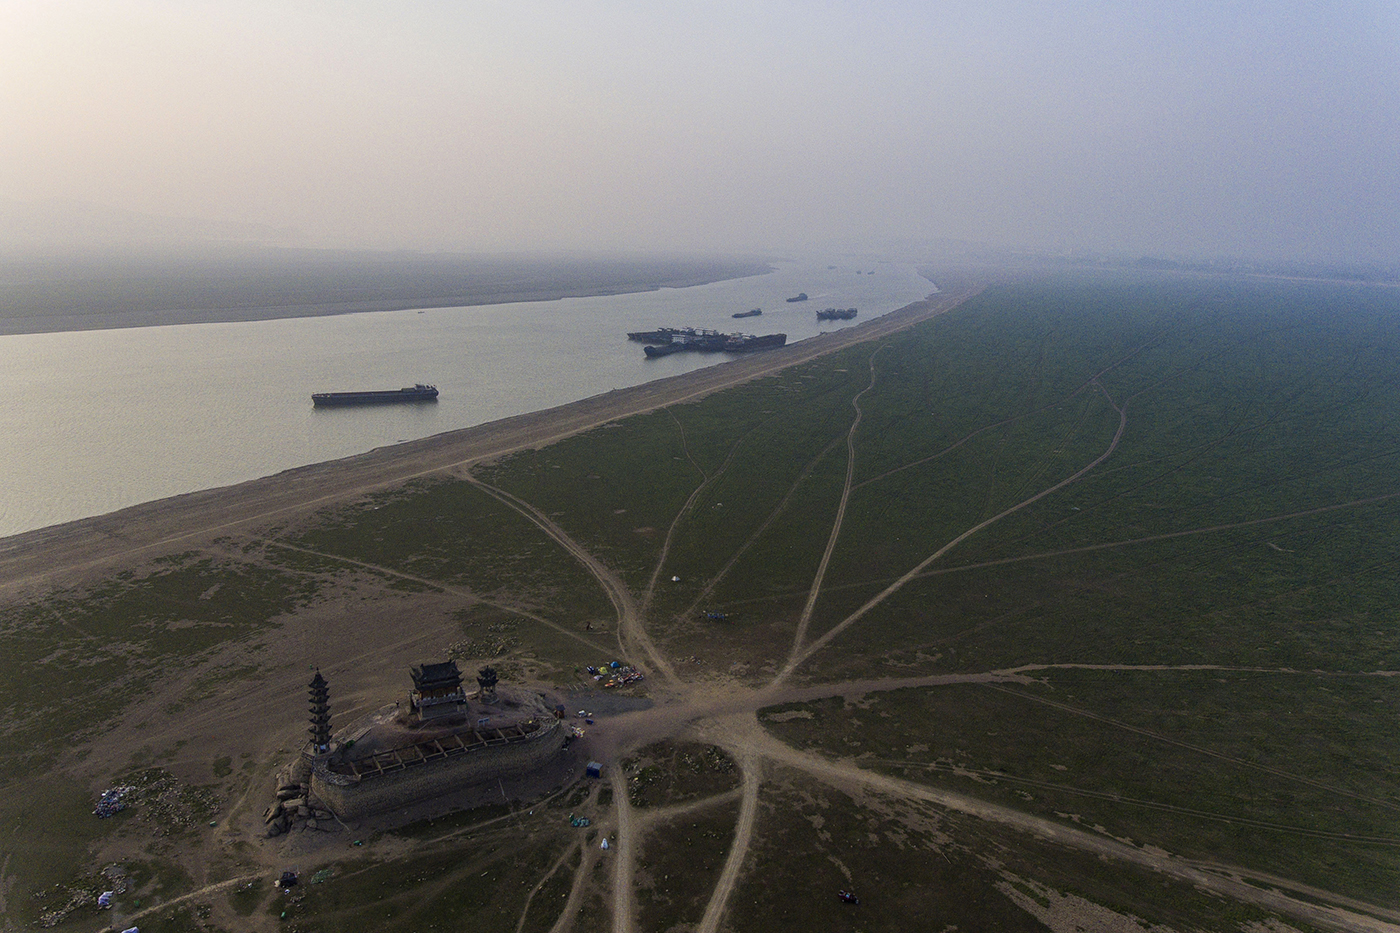 ships passing through a stretch of water in china